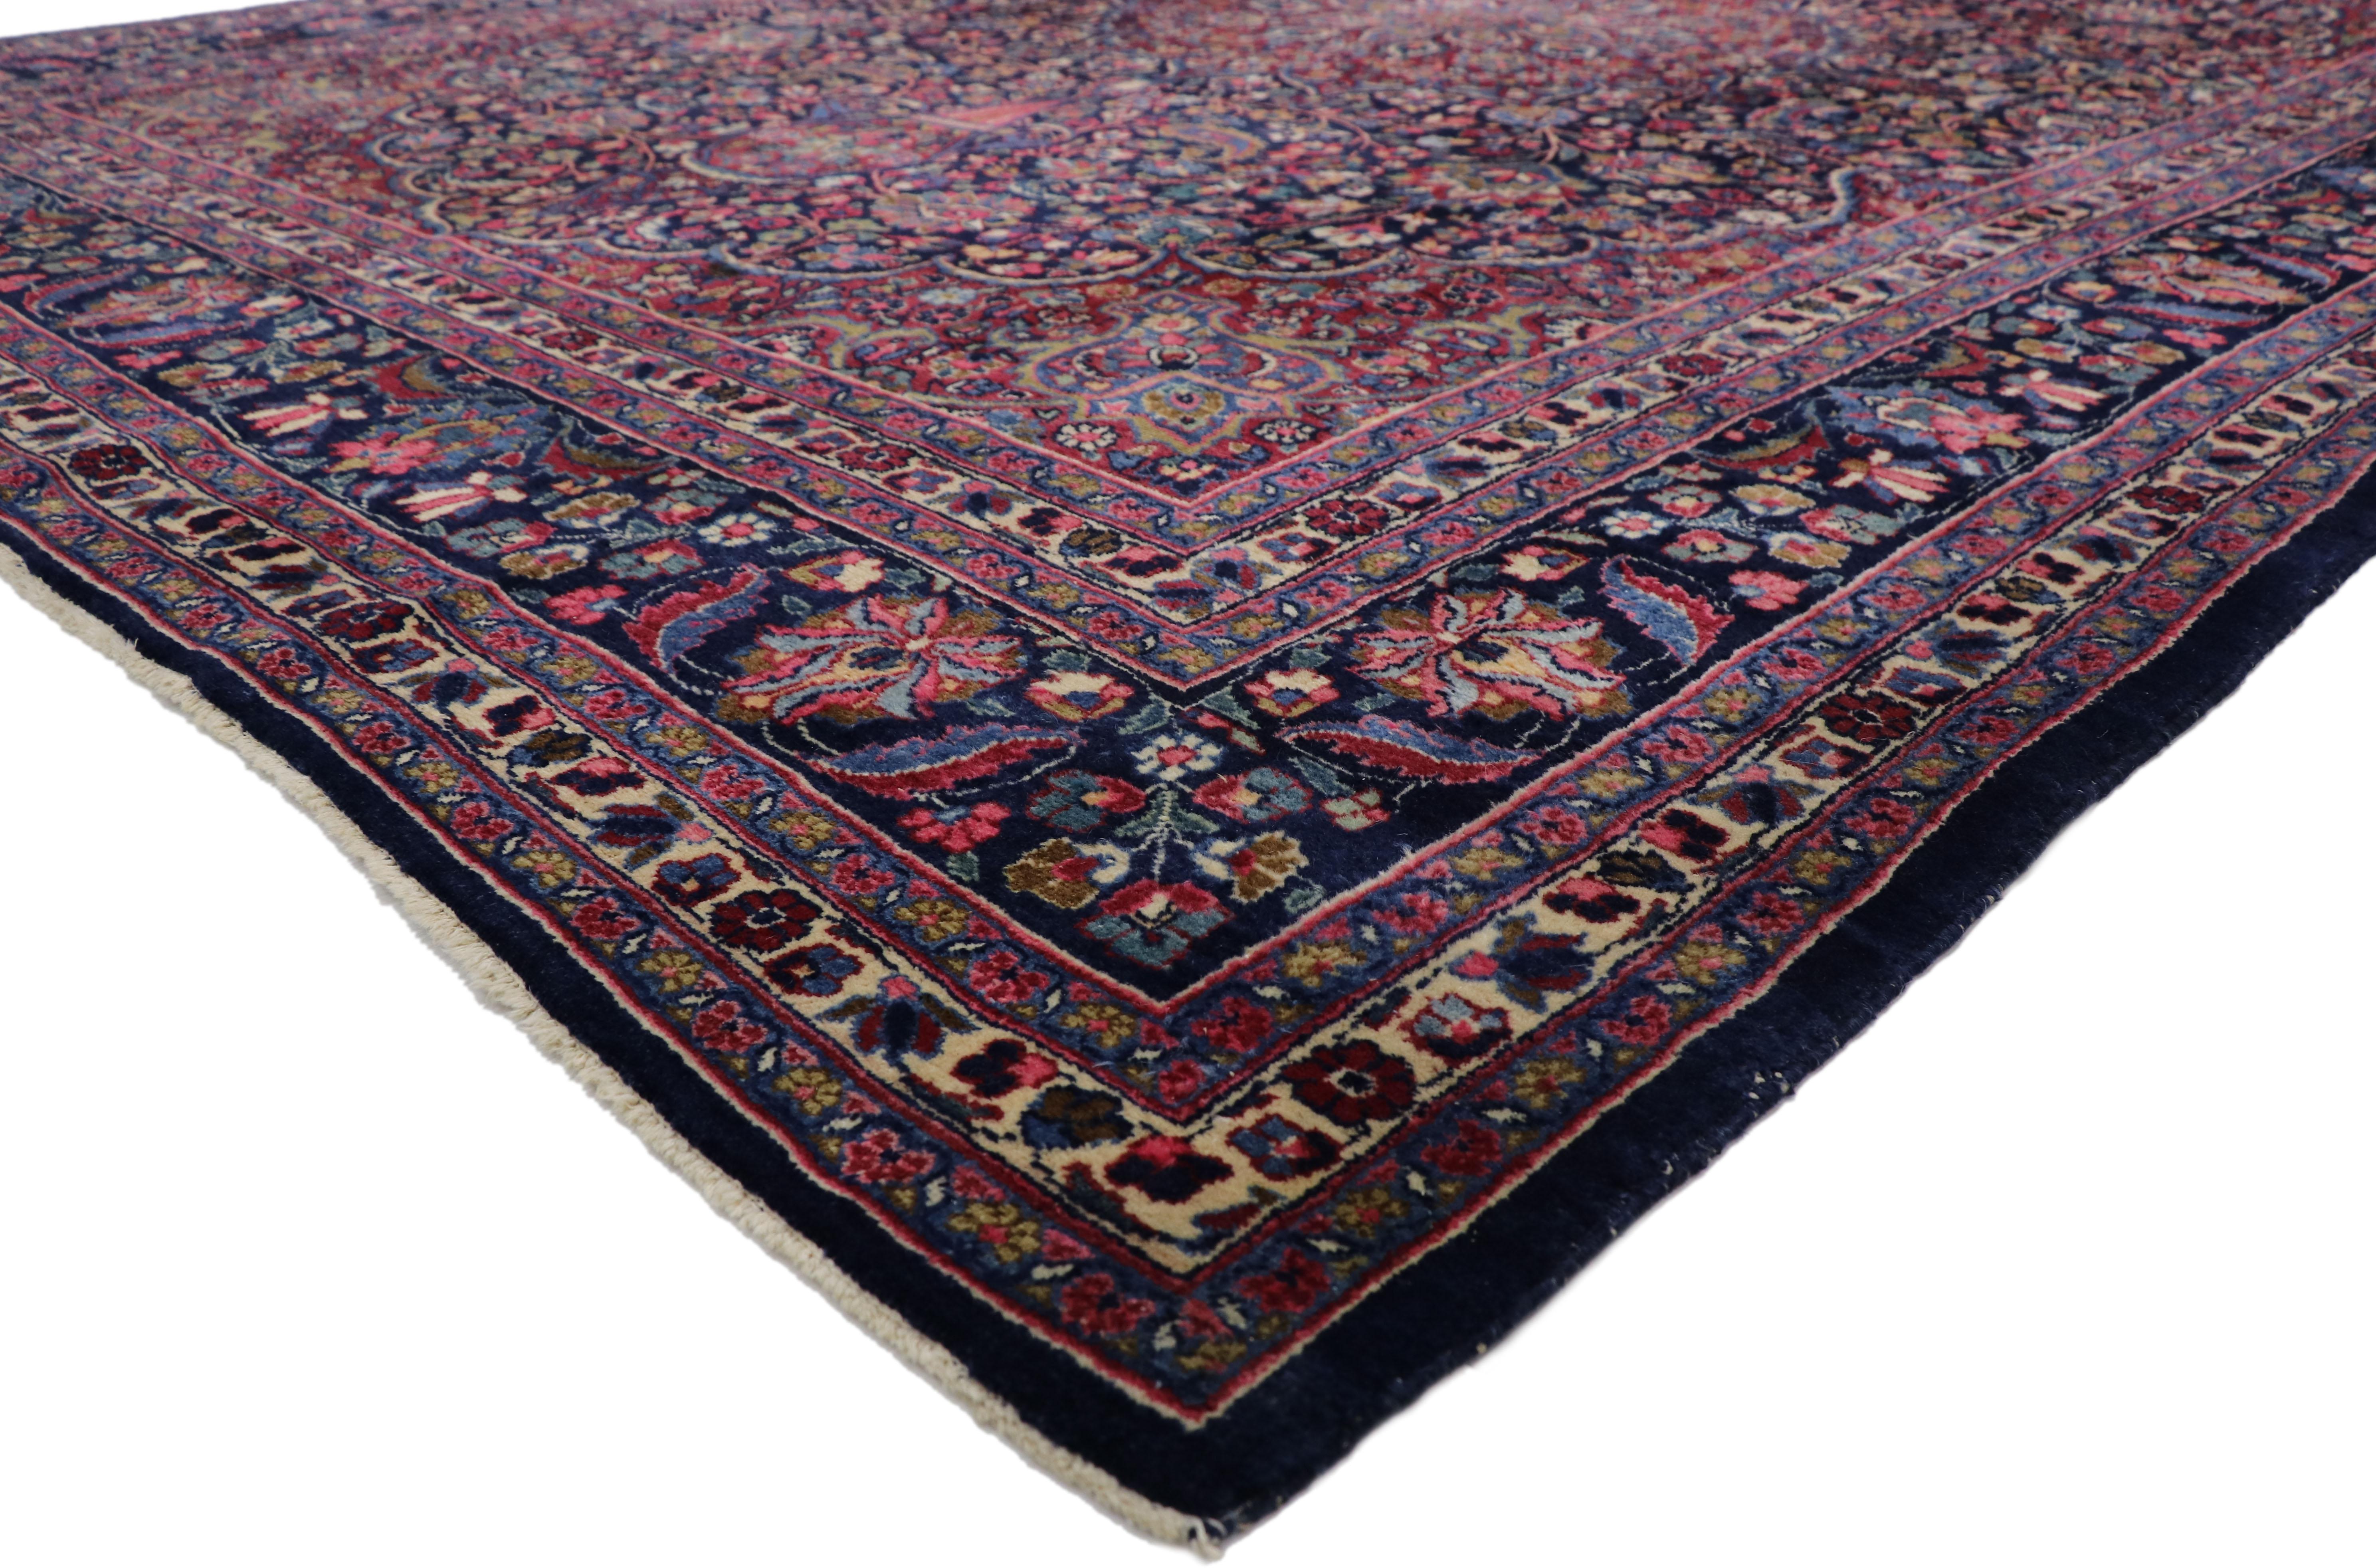 77355, vintage Persian Mashhad area rug with Arabesque baroque Regency style. Ravishing and vibrant this hand knotted wool vintage Persian Mashhad area rug features an eight-point cusped palmette medallion enclosed within a sixteen-point Mashhad